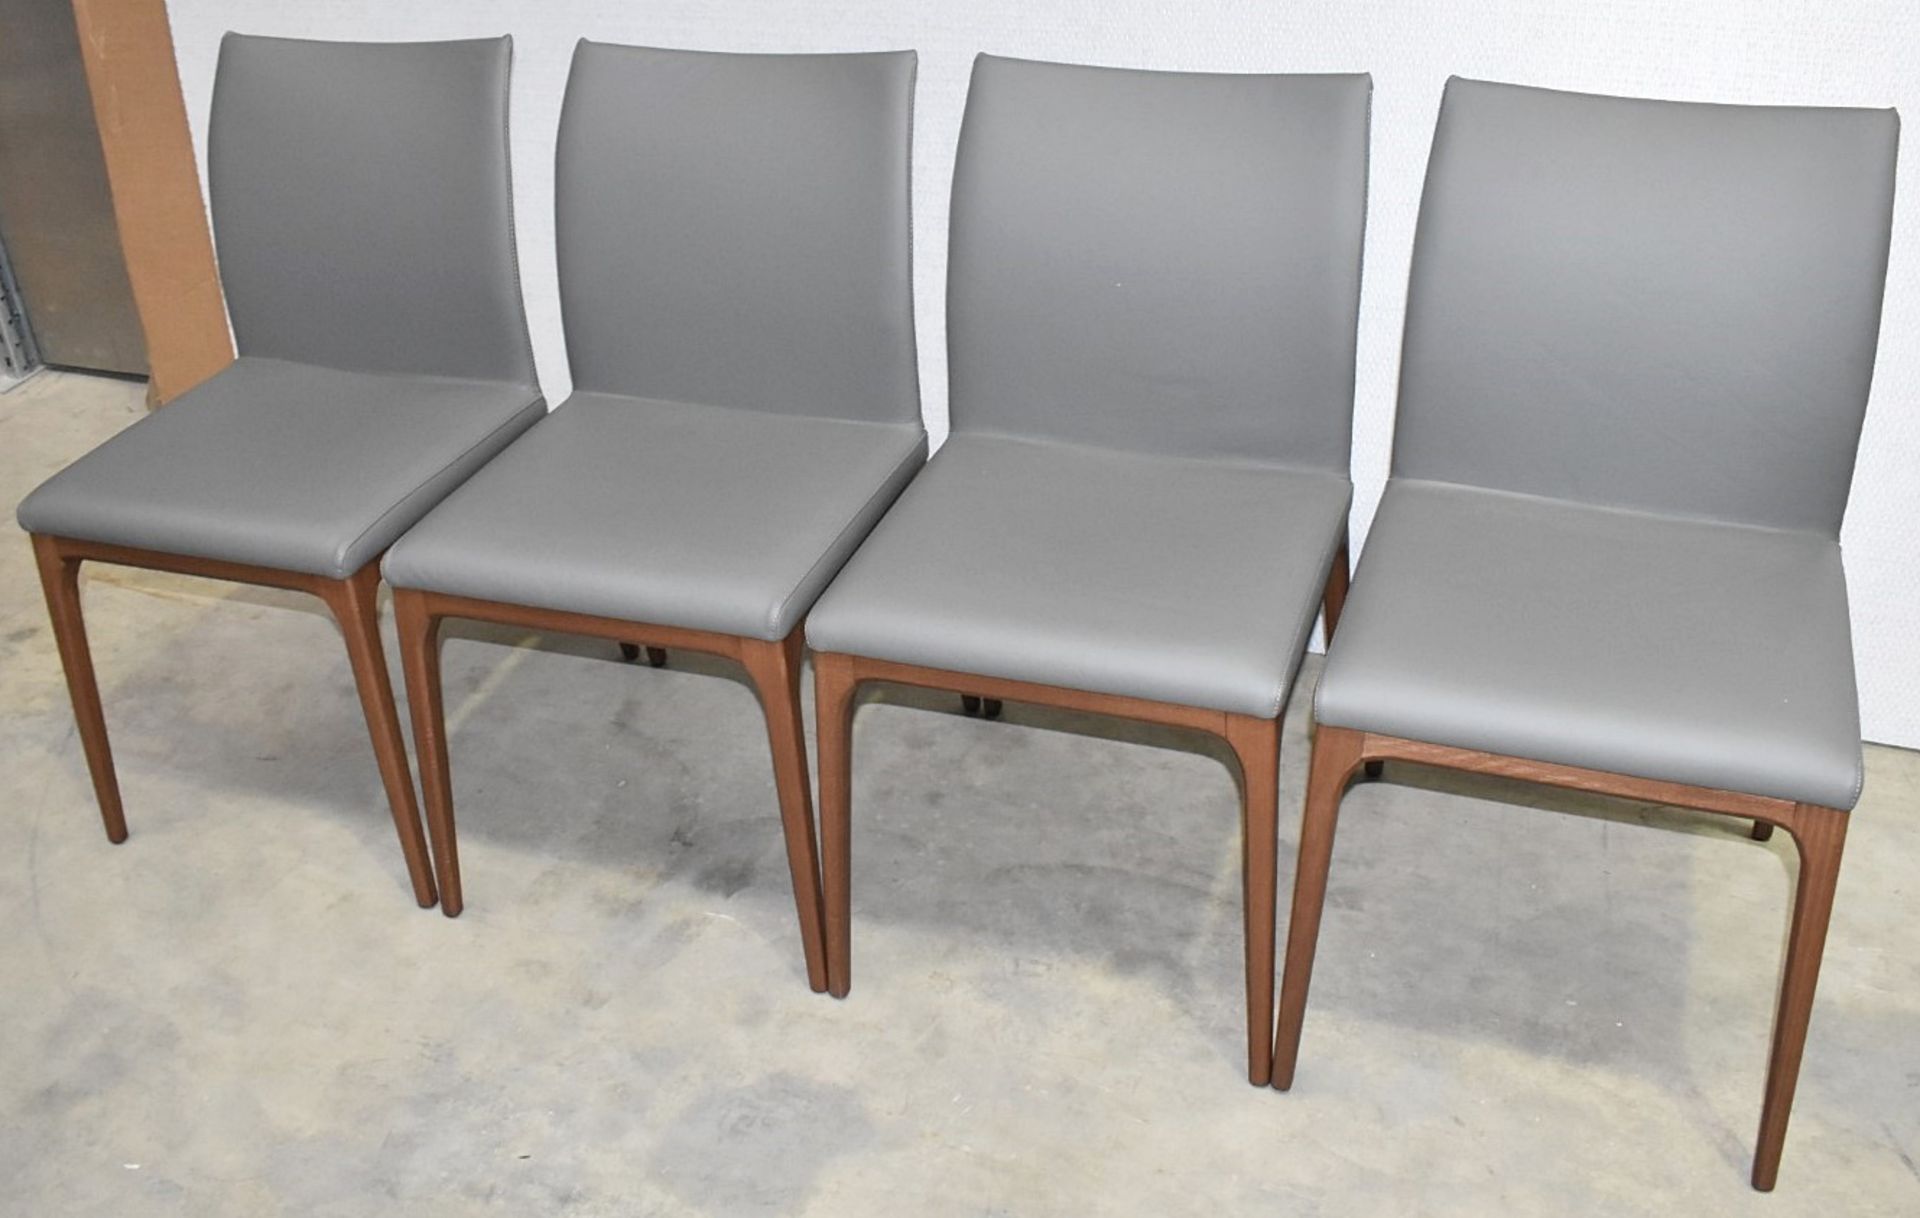 4 x CATTELAN ITALIA 'Arcadia Couture' Leather Upholstered Dining Chairs - Total Original RRP £3,540 - Image 3 of 19